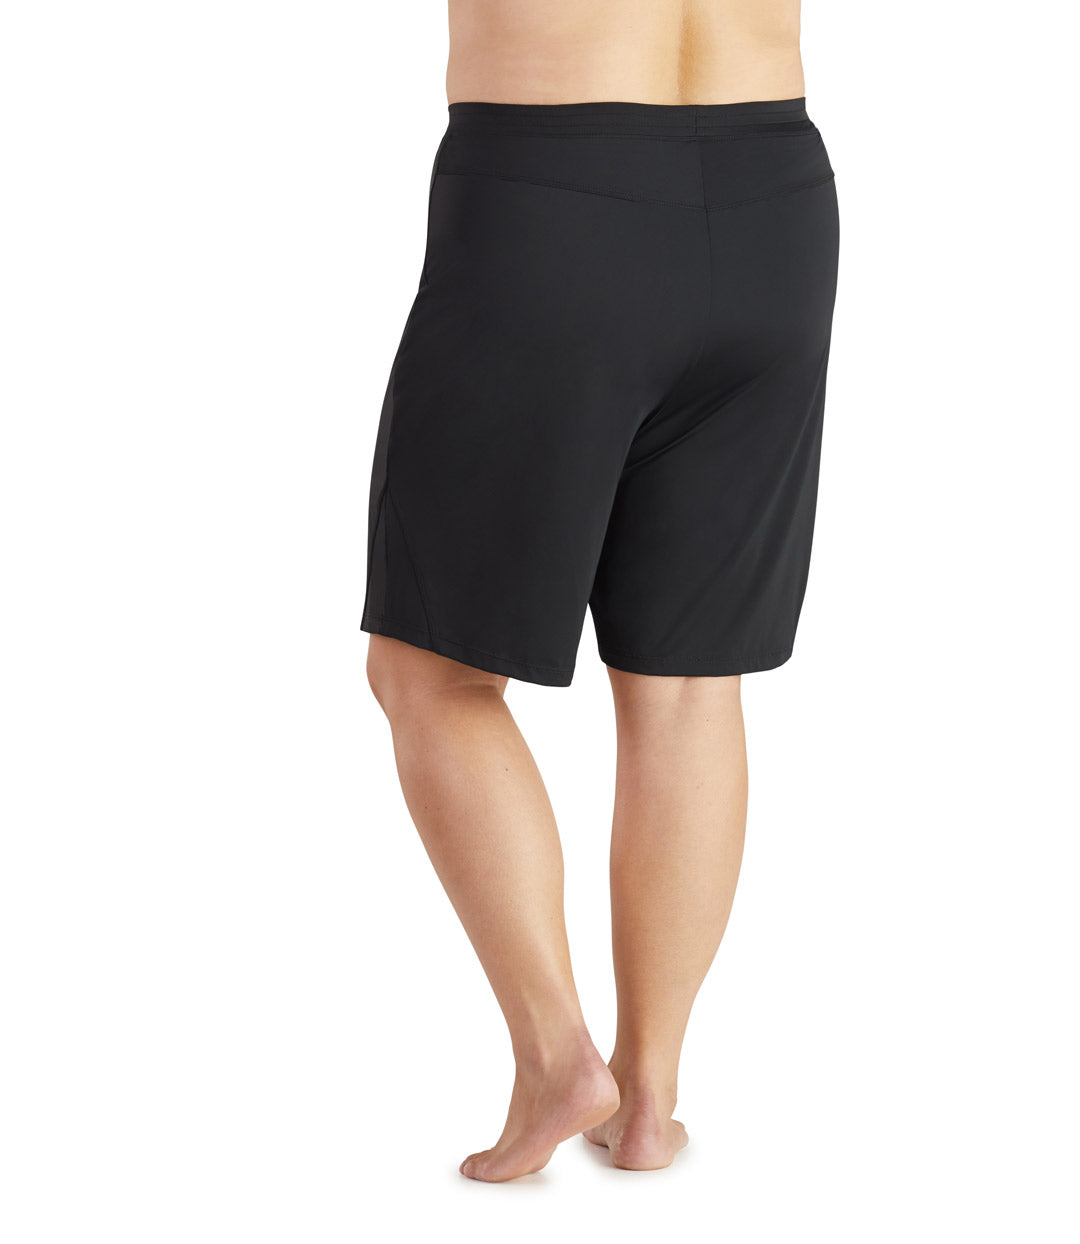 Bottom half of plus size woman facing front, wearing a black JunoActive plus size swim and beach short with brief. The hem is just above the knees.